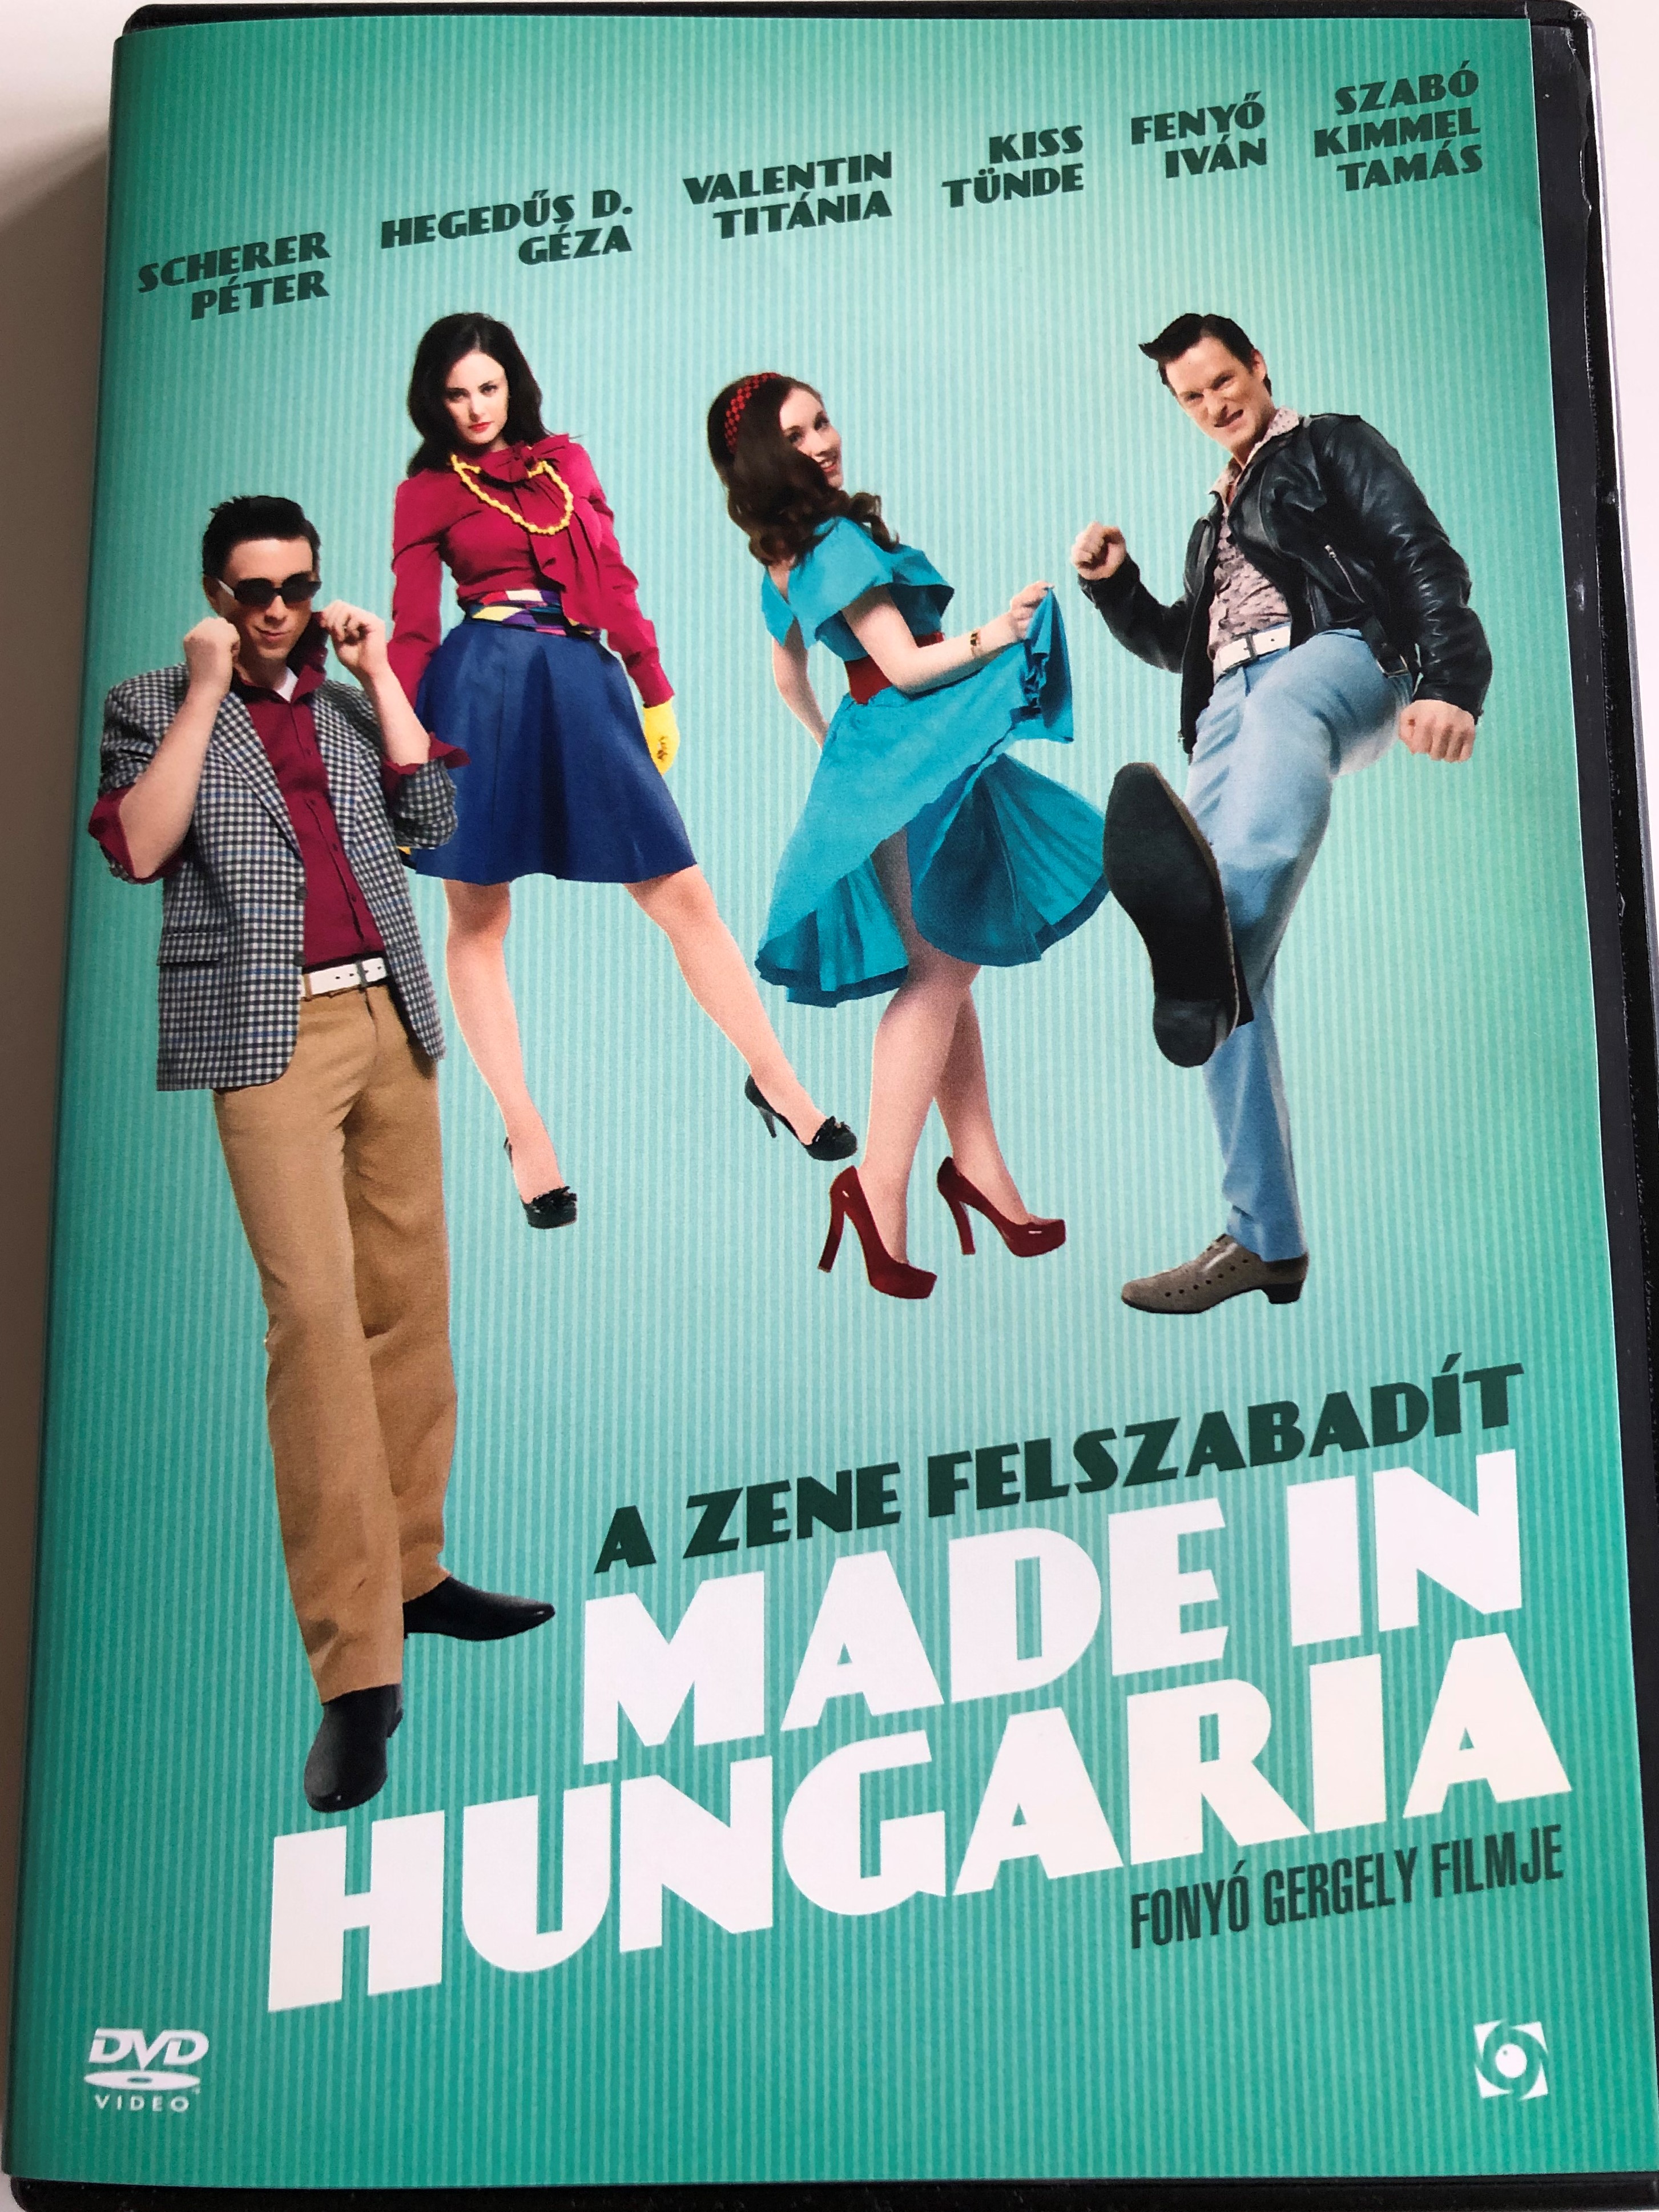 made-in-hungaria-dvd-2009-directed-by-gergely-fony-starring-tam-s-szab-kimmel-t-nde-kiss-iv-n-feny-1-.jpg